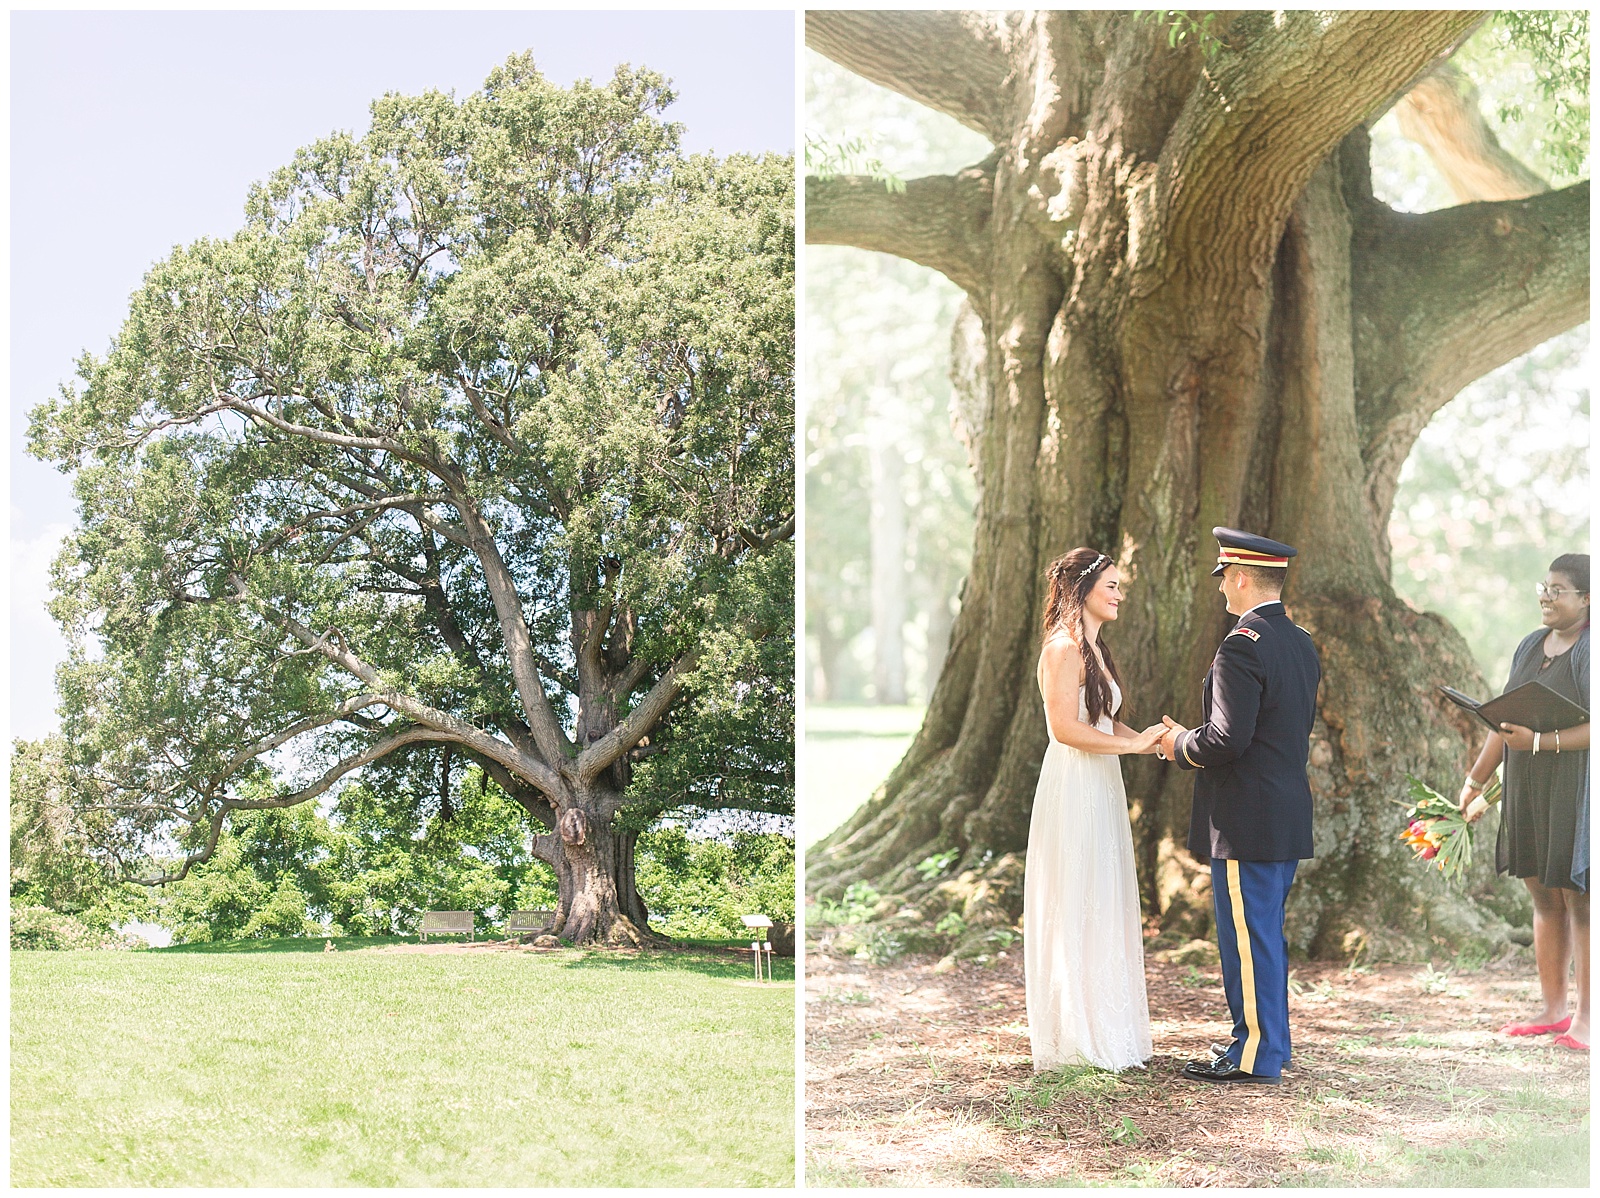 the bride and groom chose to get married under a big tree on shirley plantation with close family members